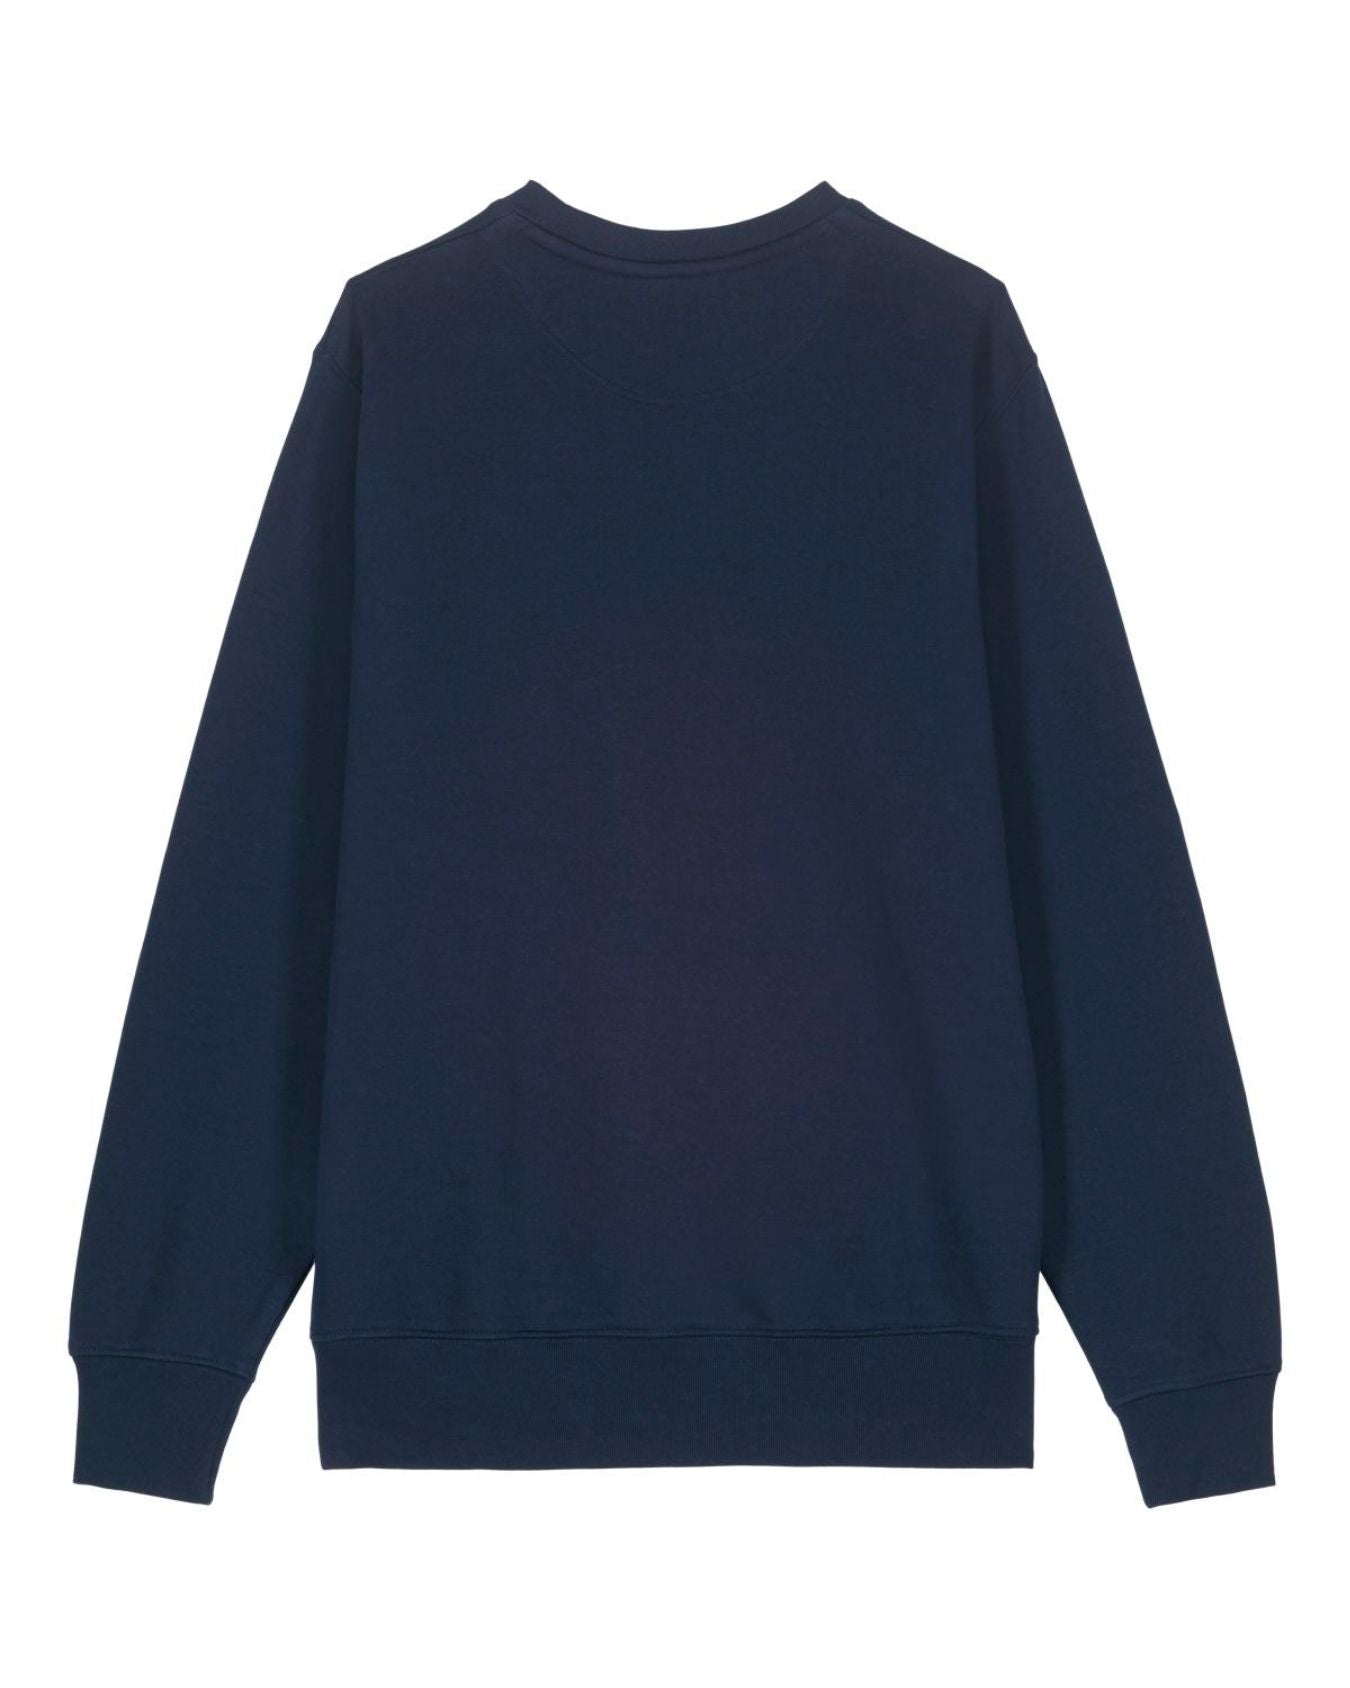 Together-Sweater "Navy"